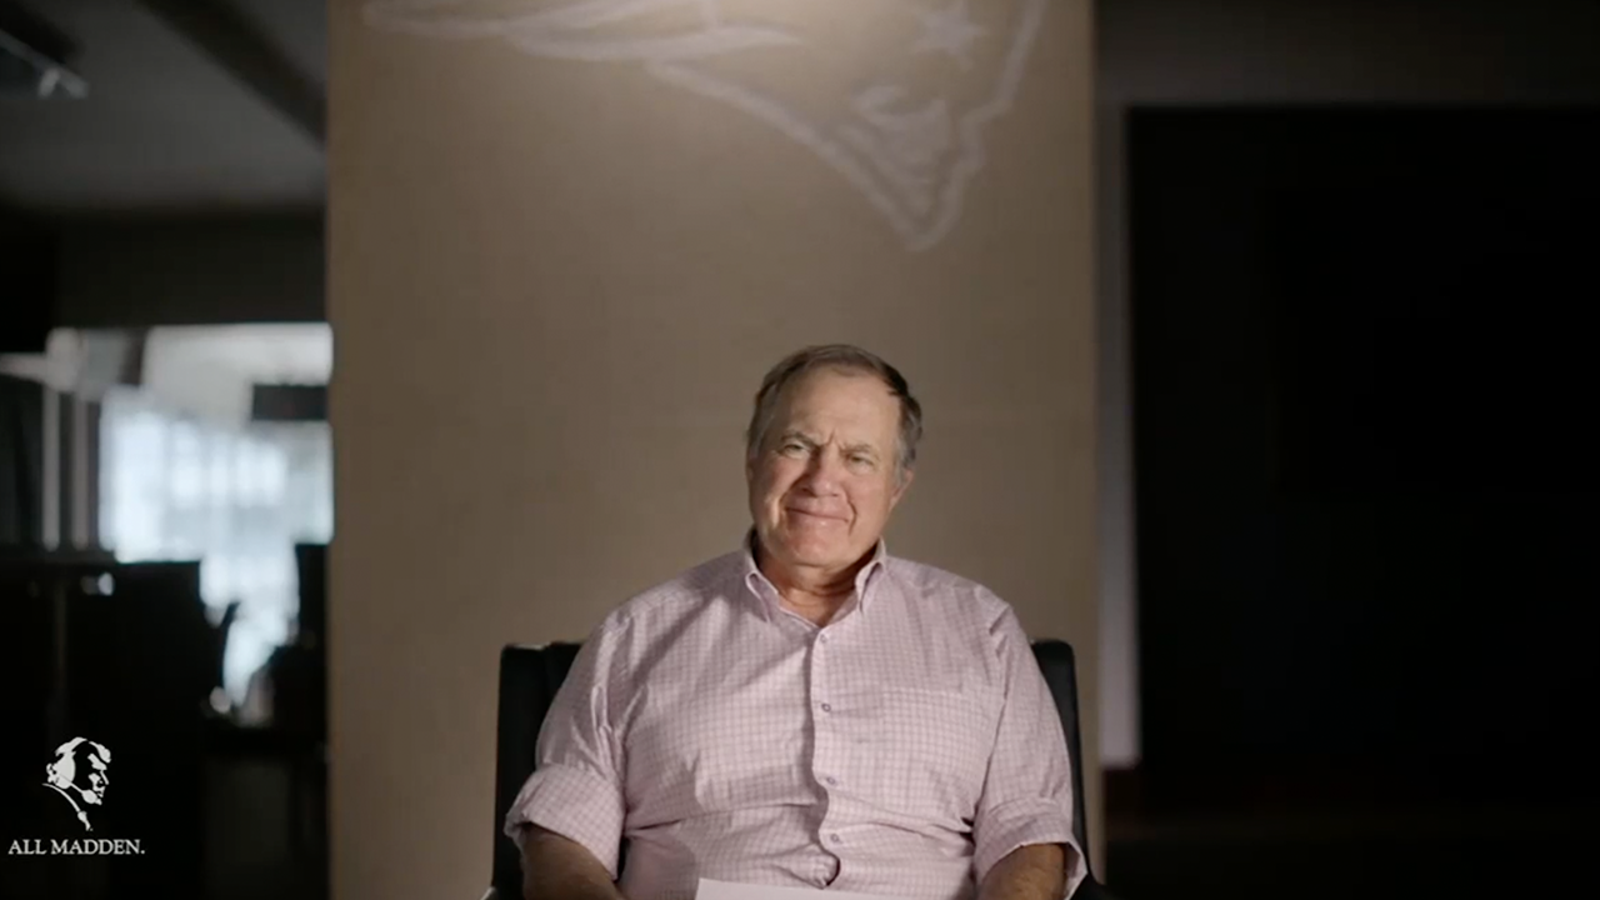 Bill Belichick recalls facing John Madden early in his coaching career in 'All Madden'